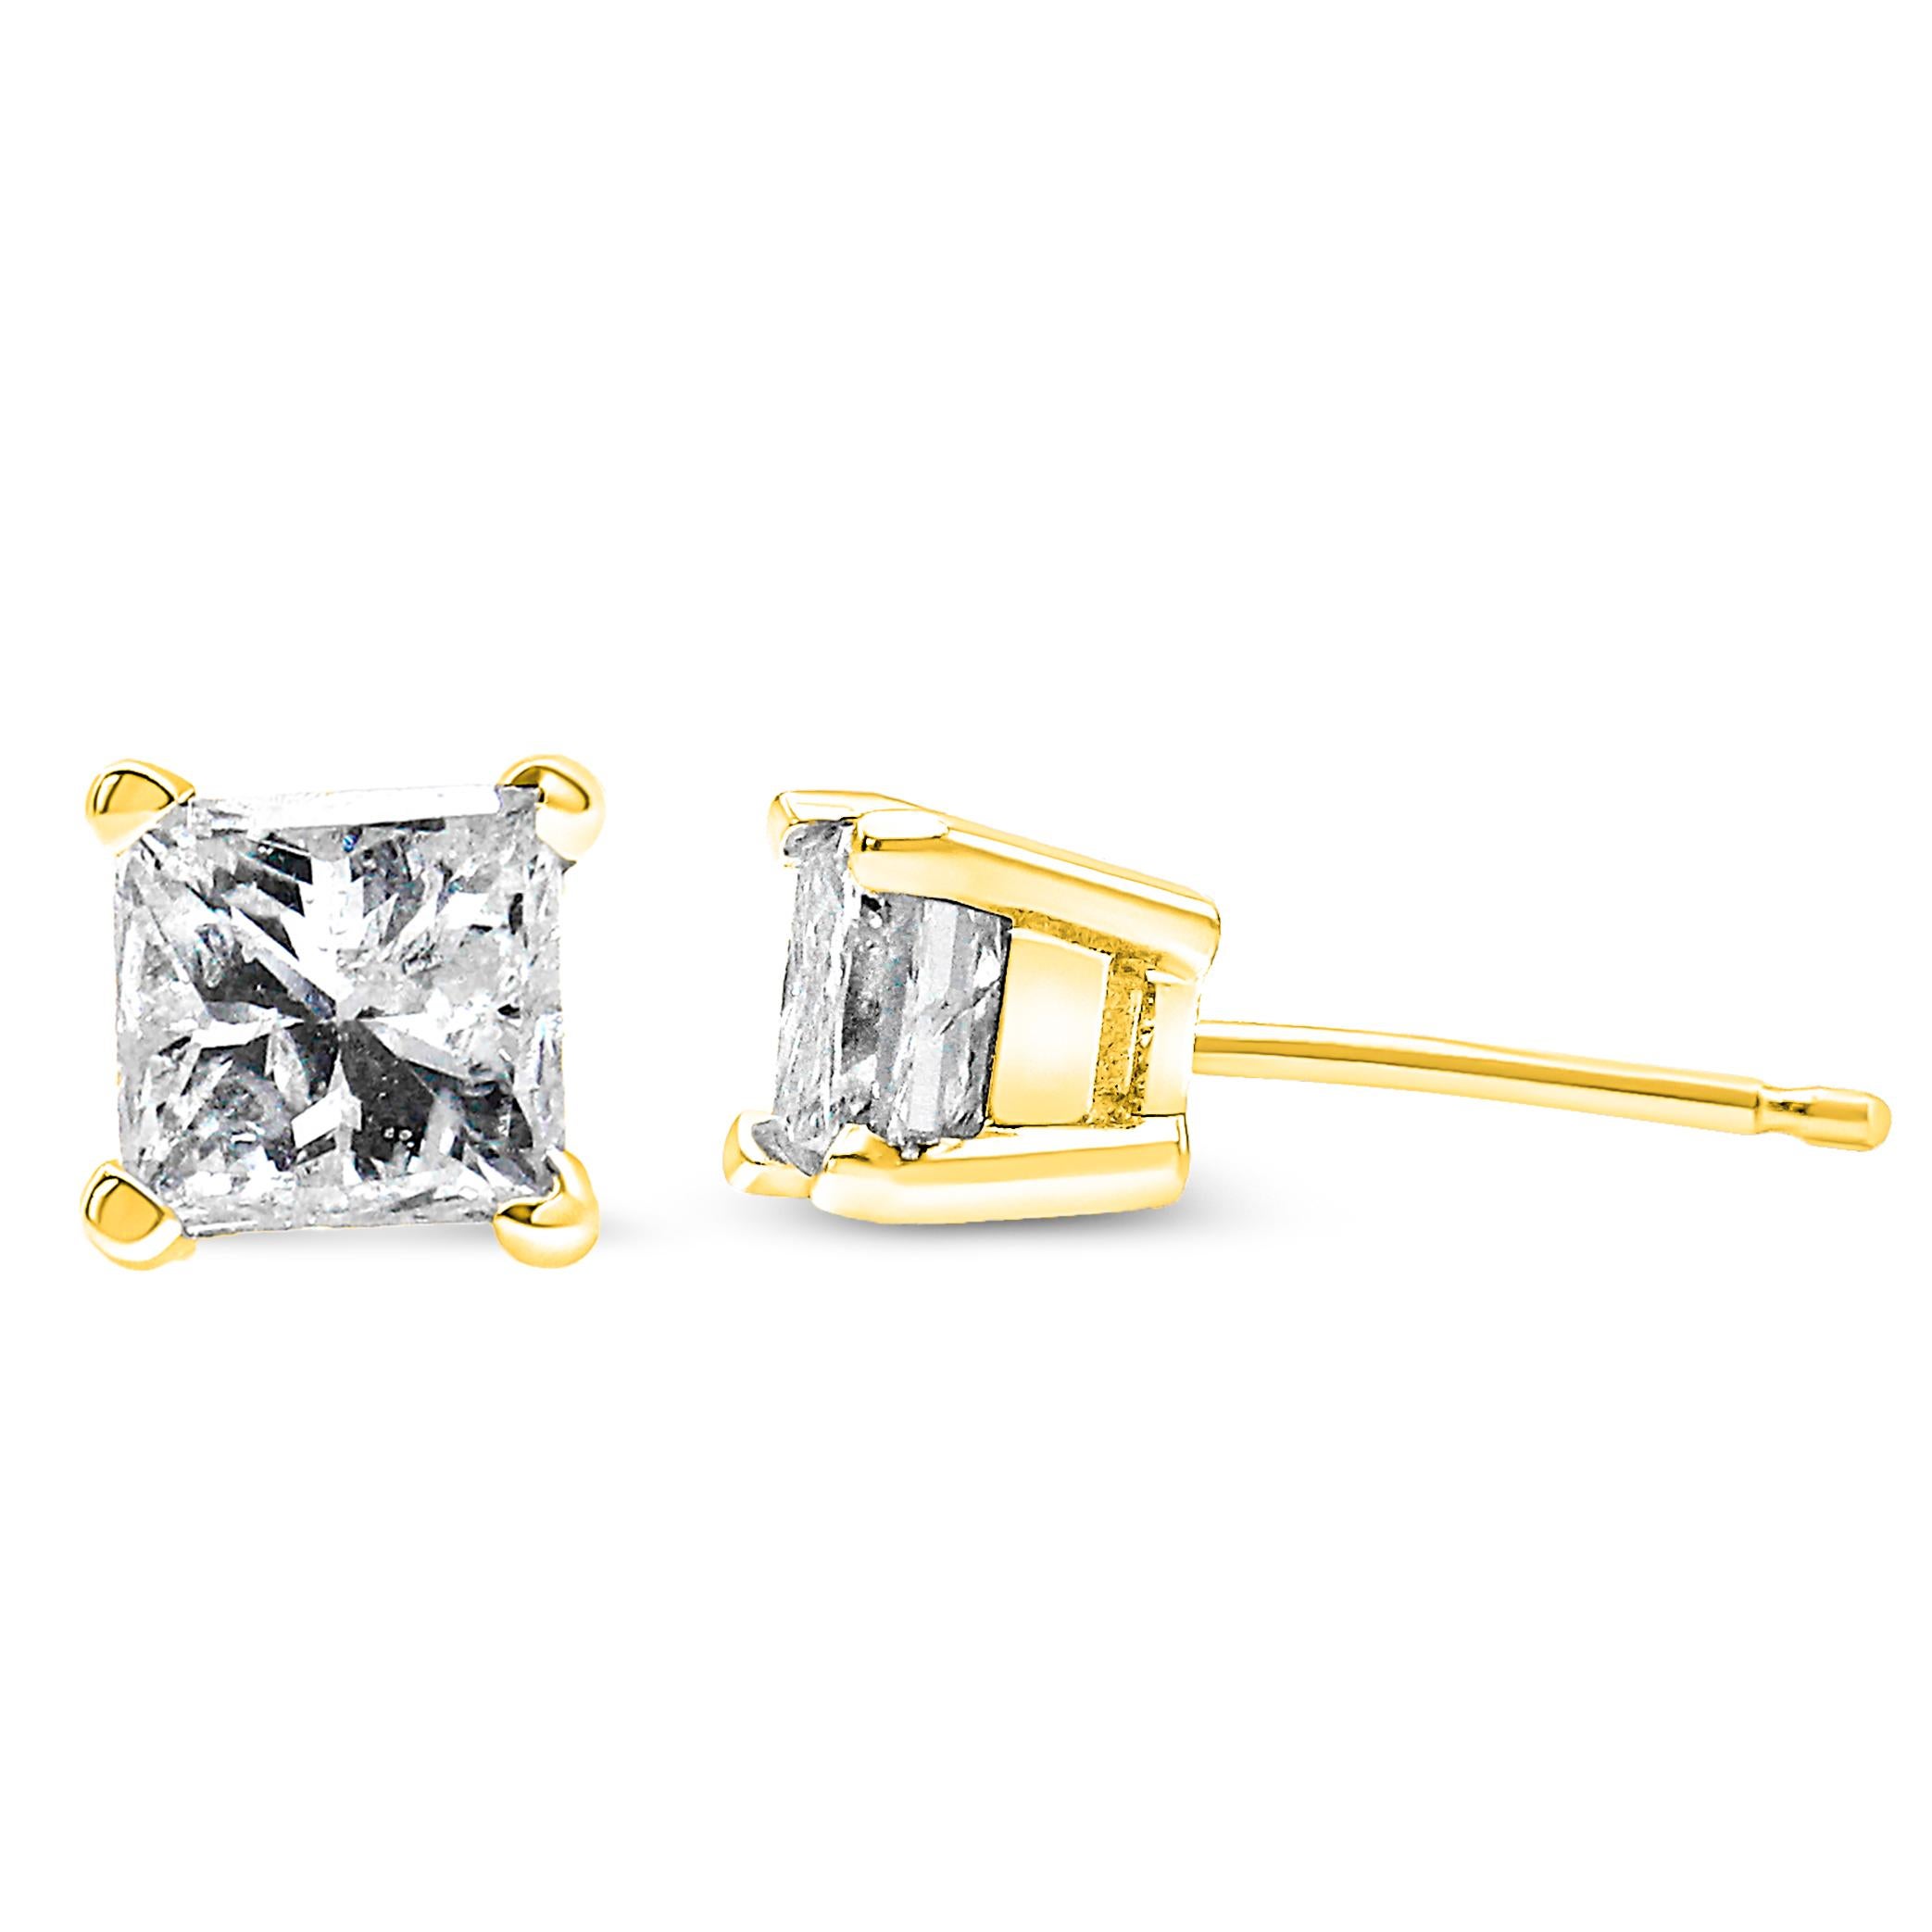 Real 14K Yellow Gold 2 Carat Solitaire Stud Earring Value $995.00 